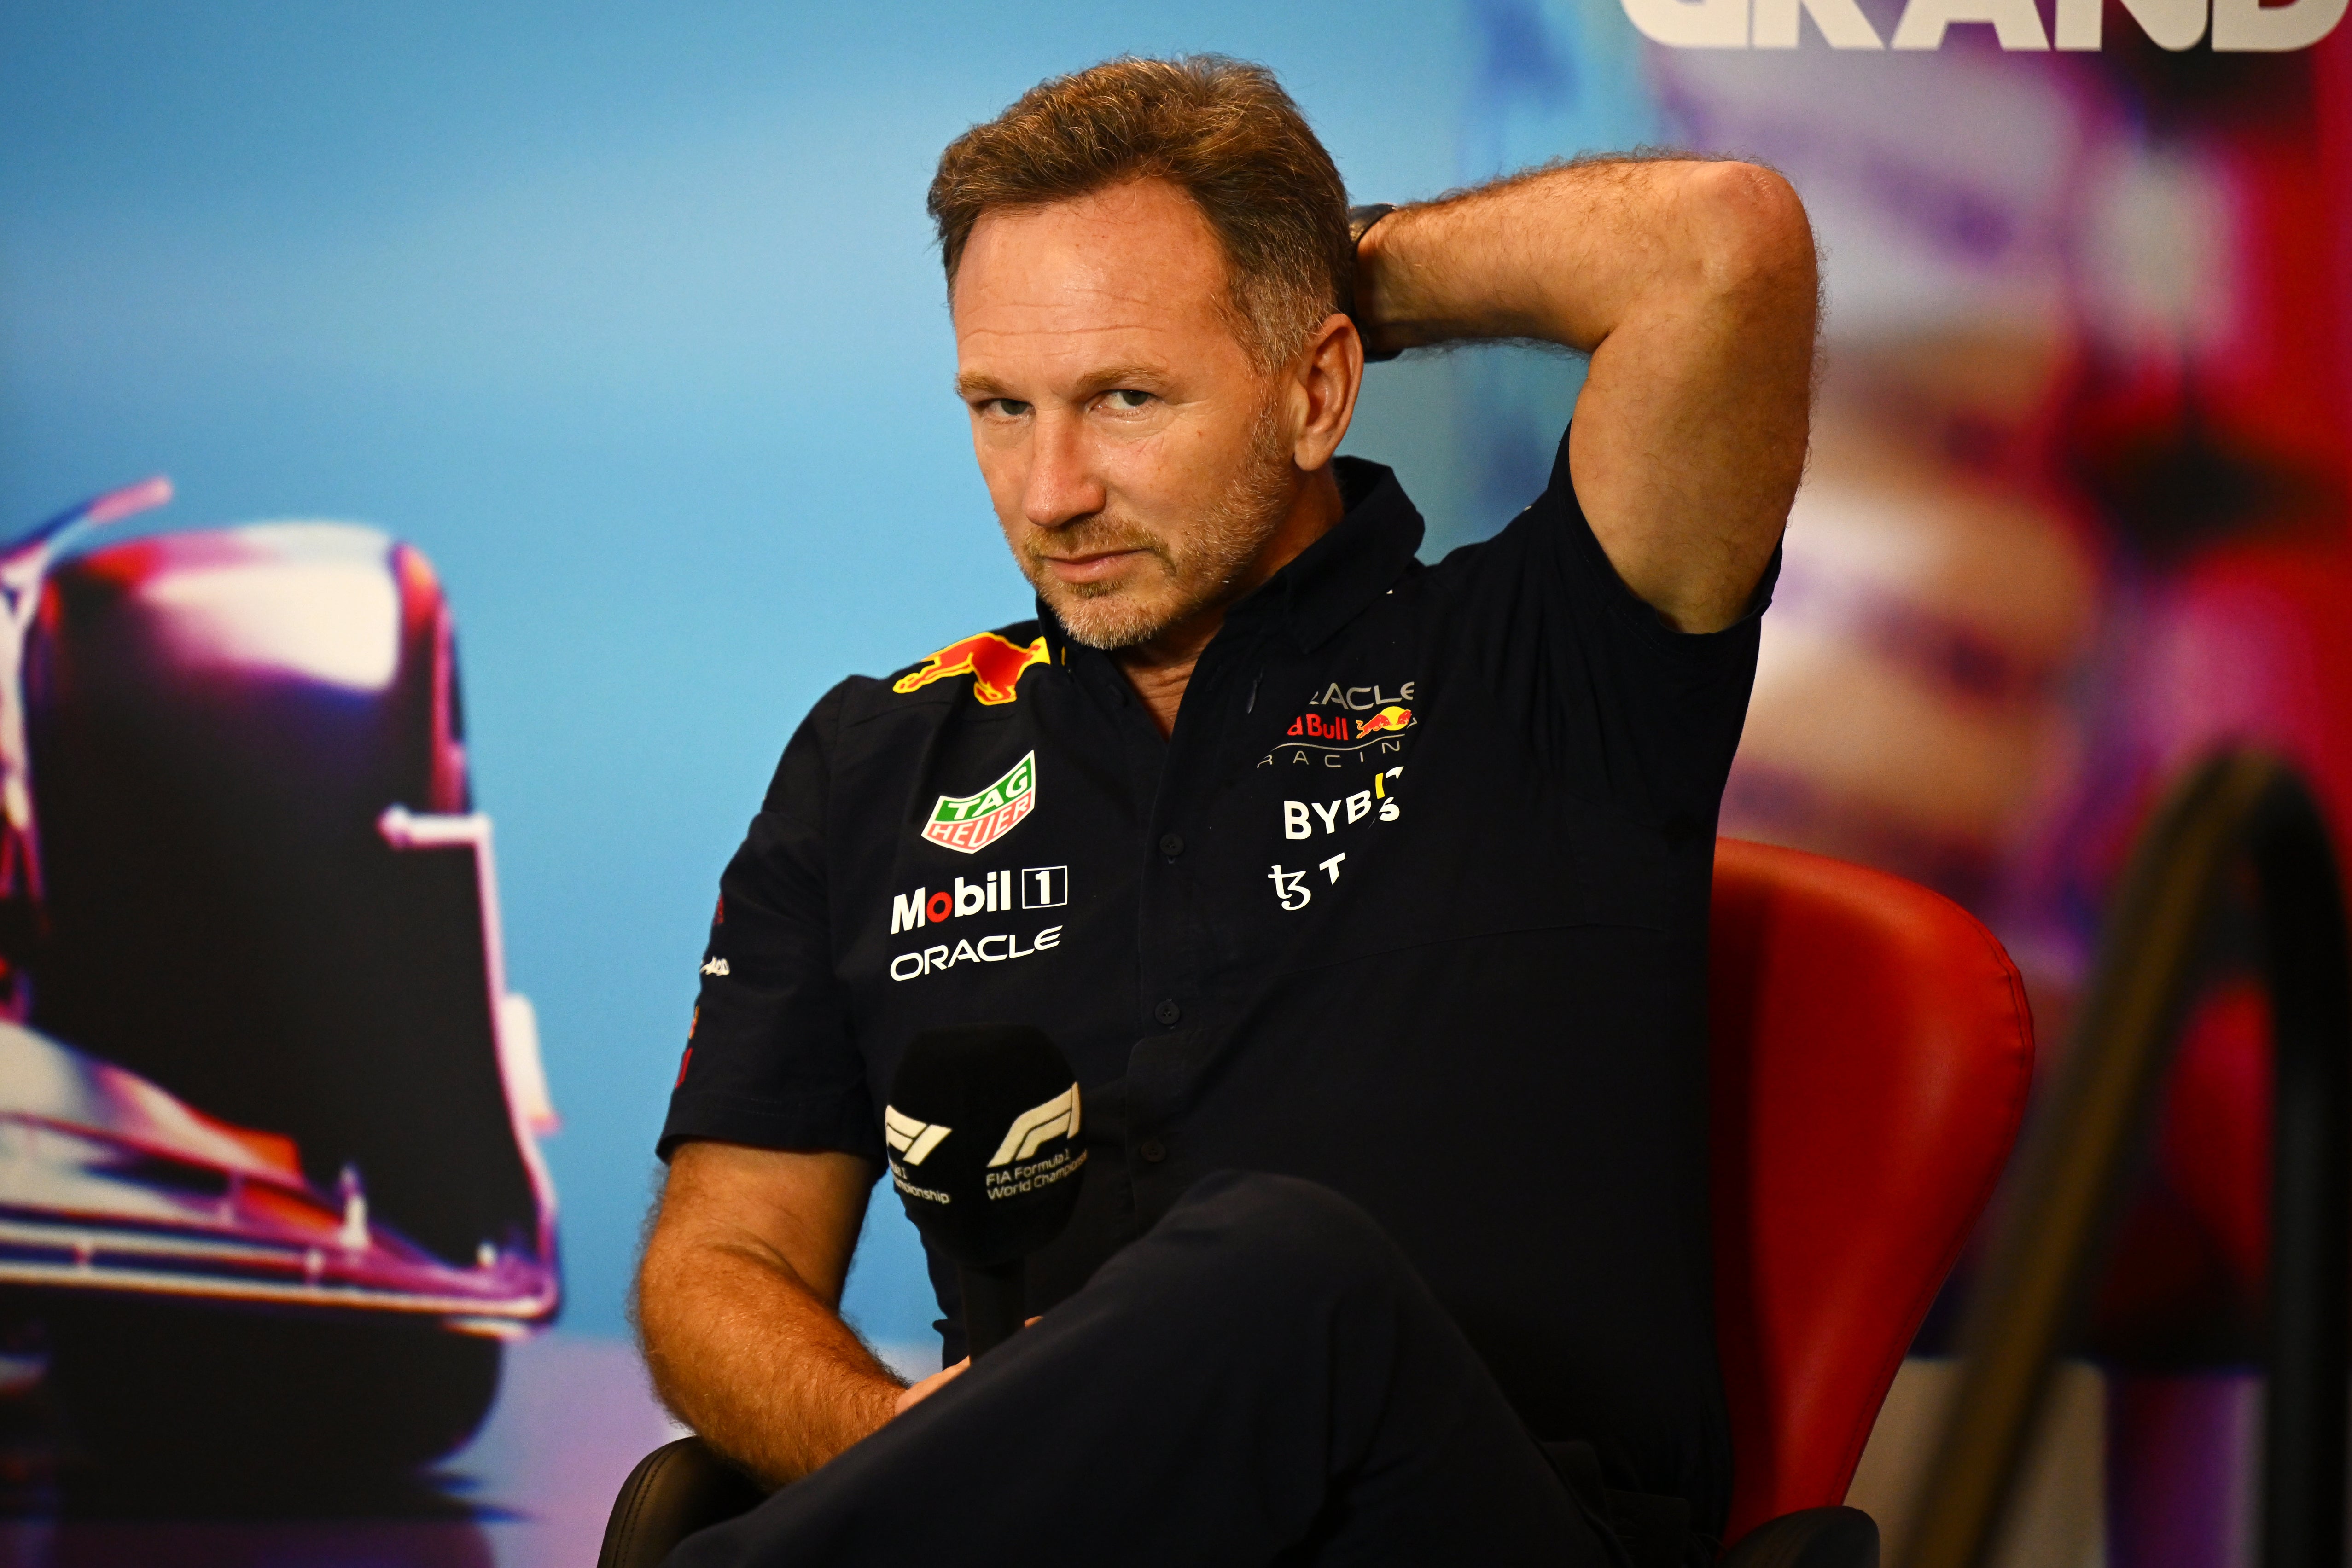 Christian Horner was furious with accusations of cheating